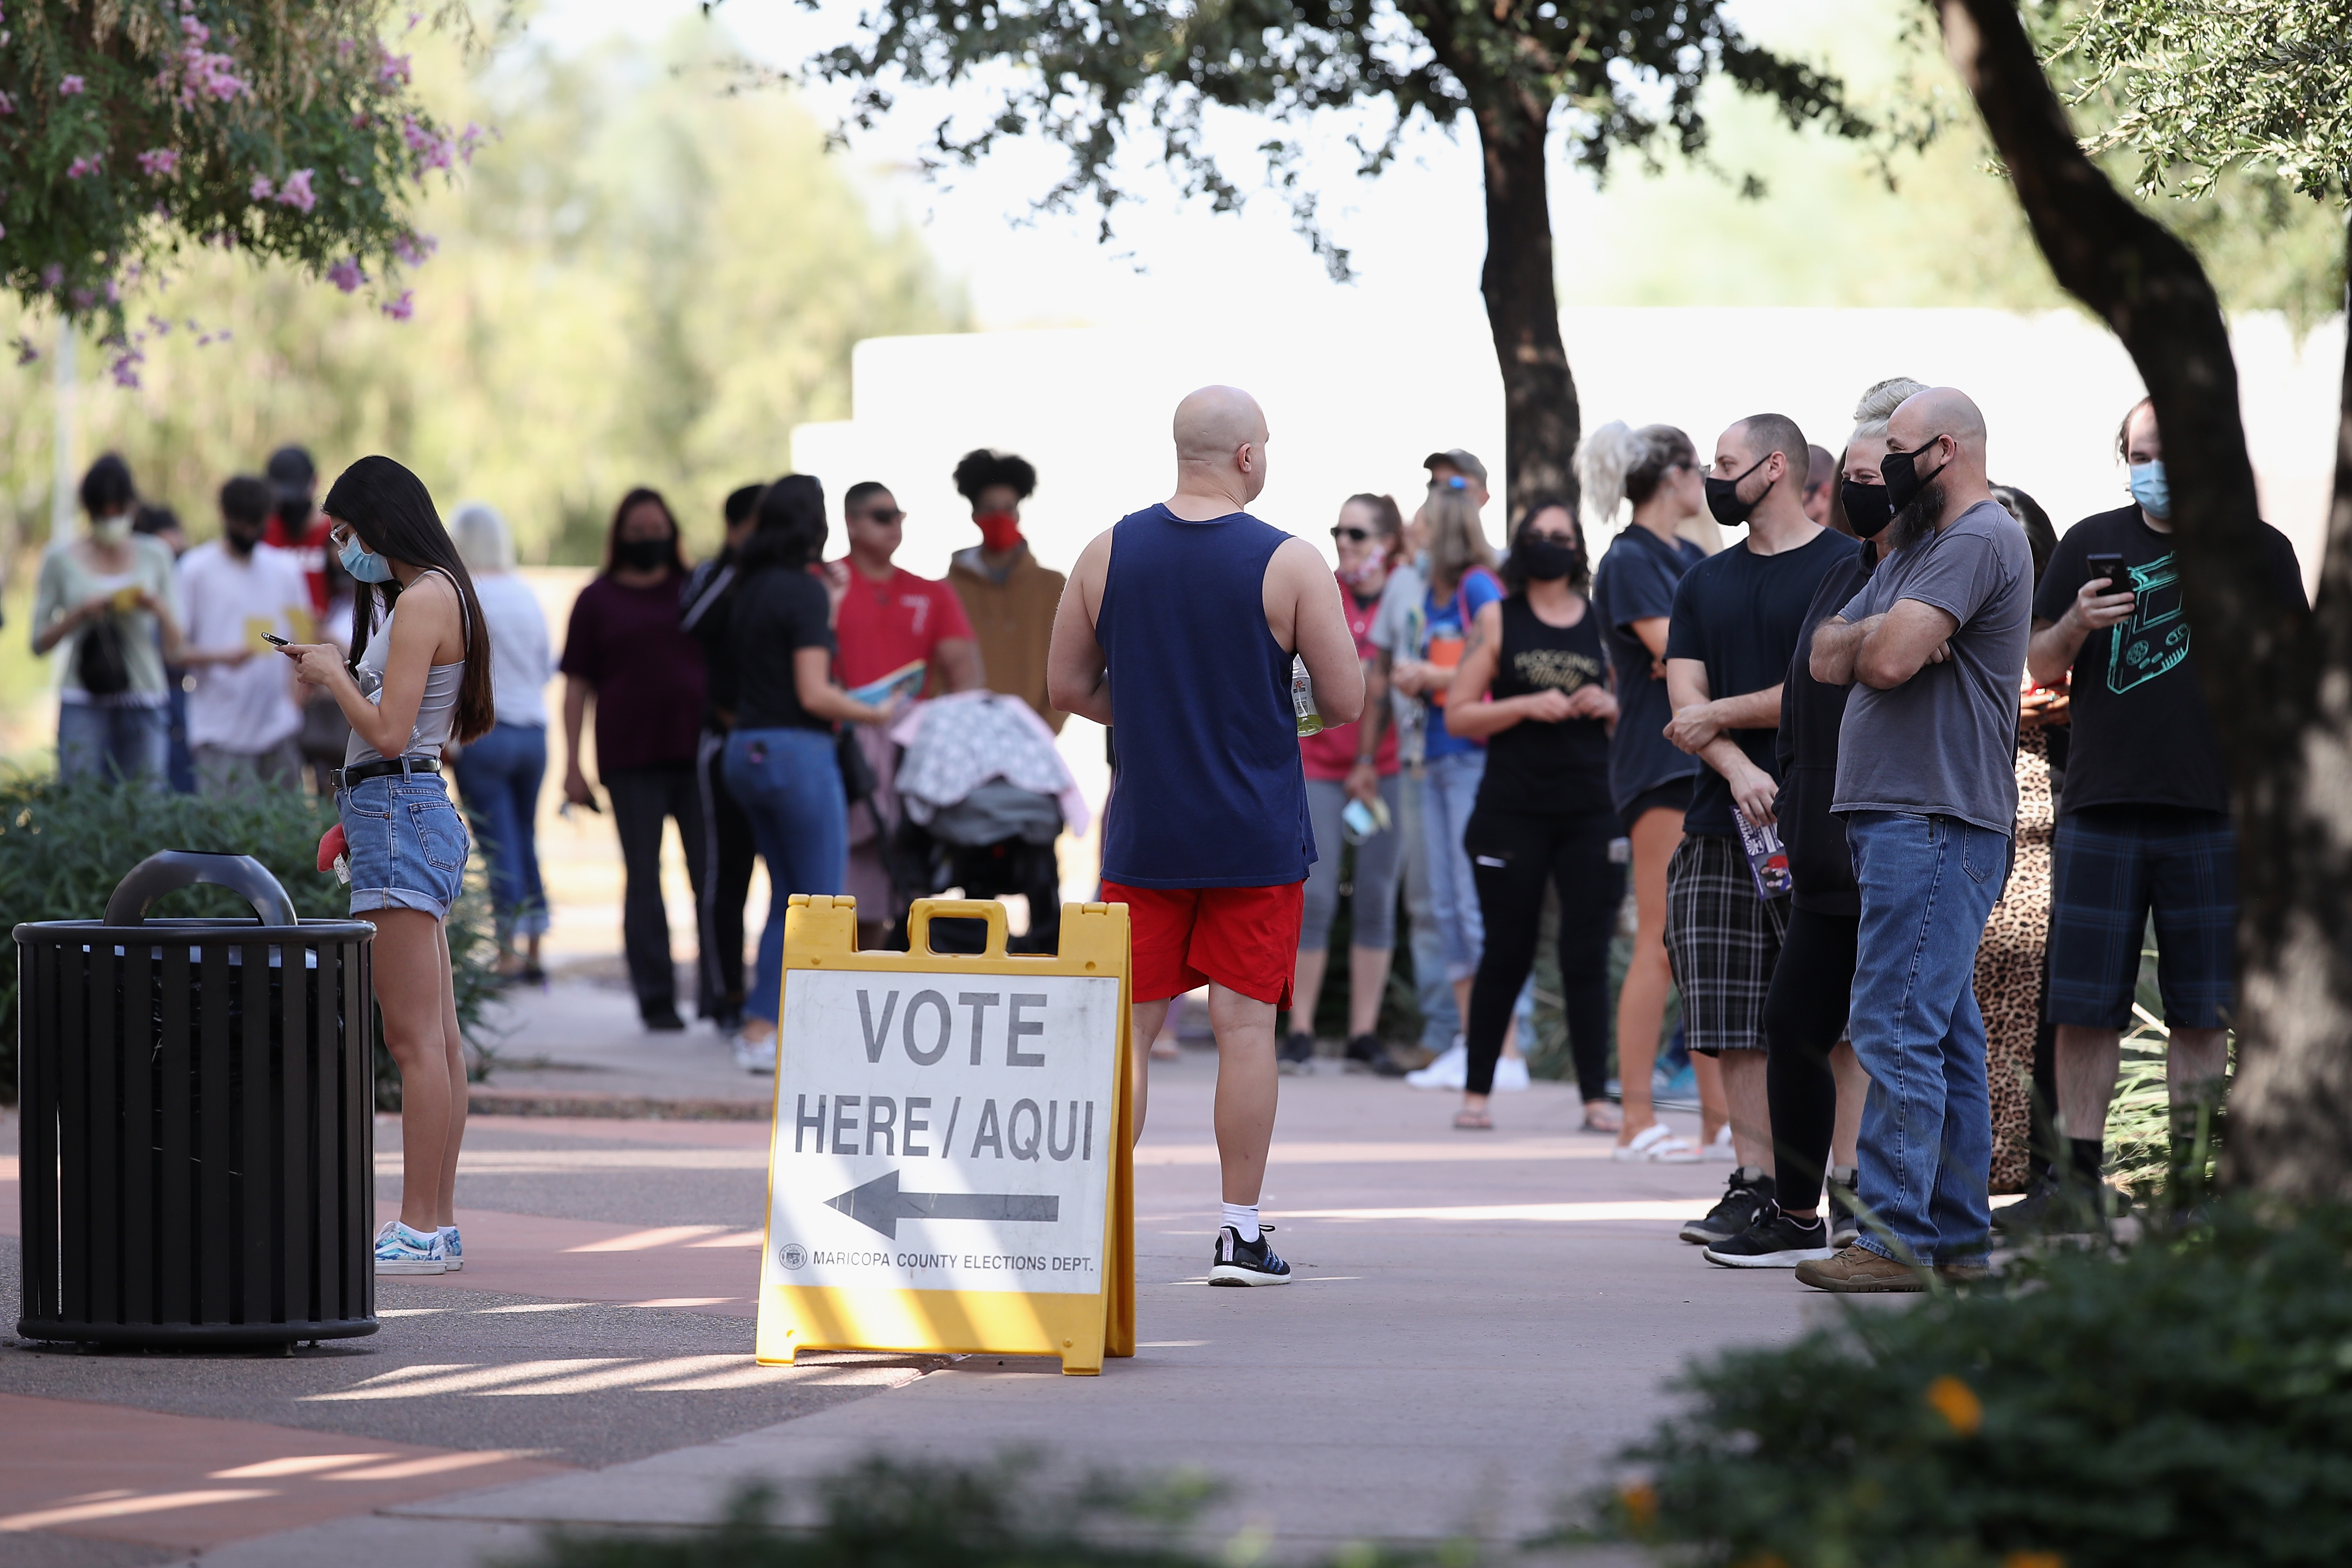 Voters wait in line at a polling location.